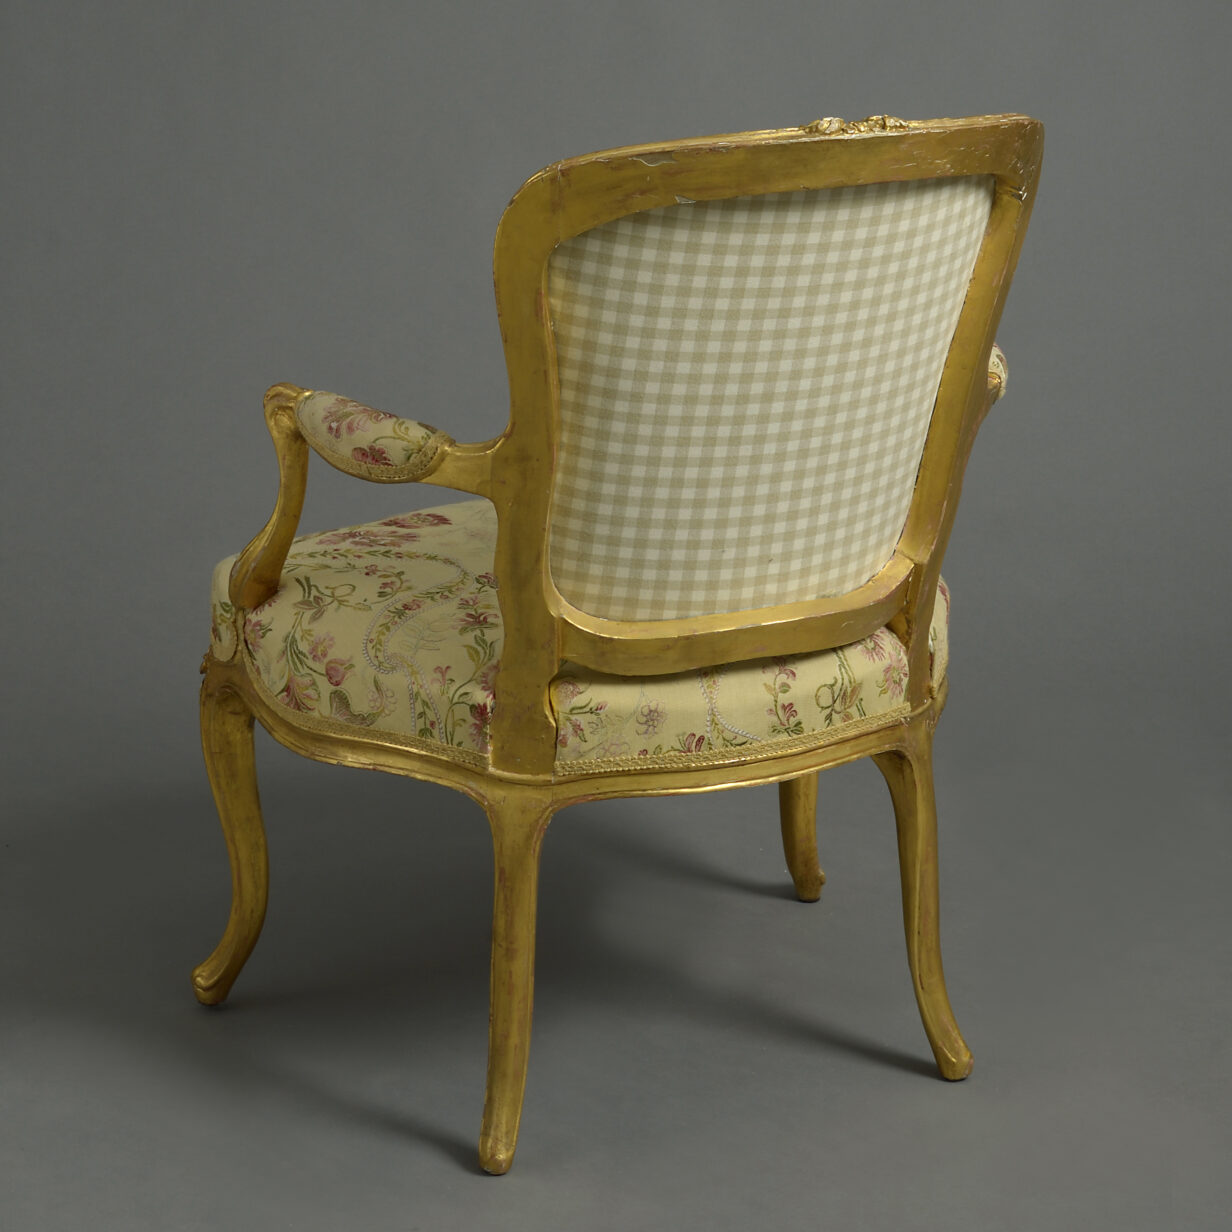 A close pair of louis xv giltwood rococo fauteuil armchairs